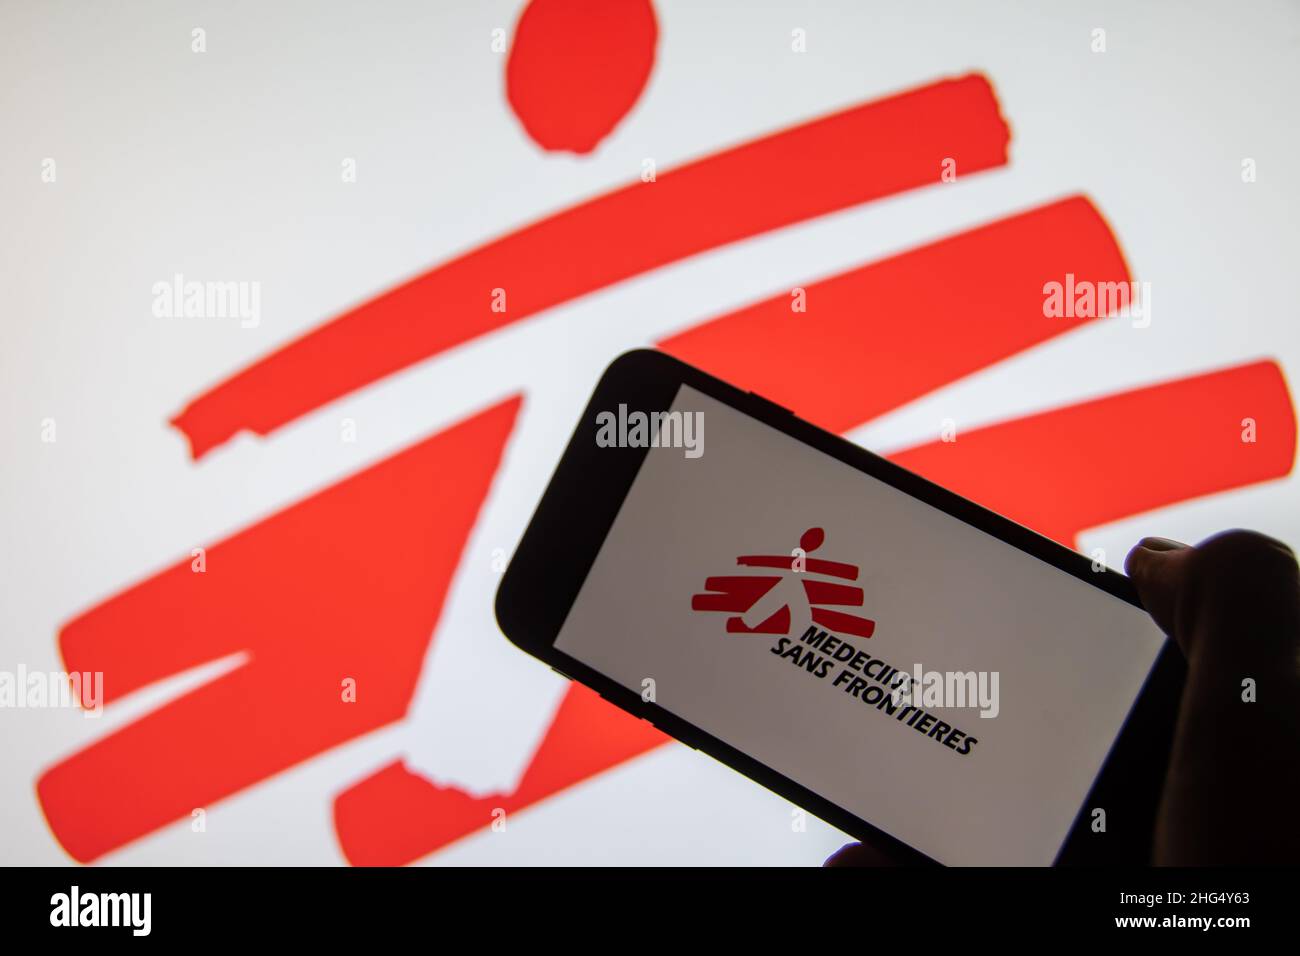 Rheinbach, Germany  15 January 2022,  The brand logo of 'Medecins Sans Frontieres' on the display of a smartphone (focus on brand logo) Stock Photo